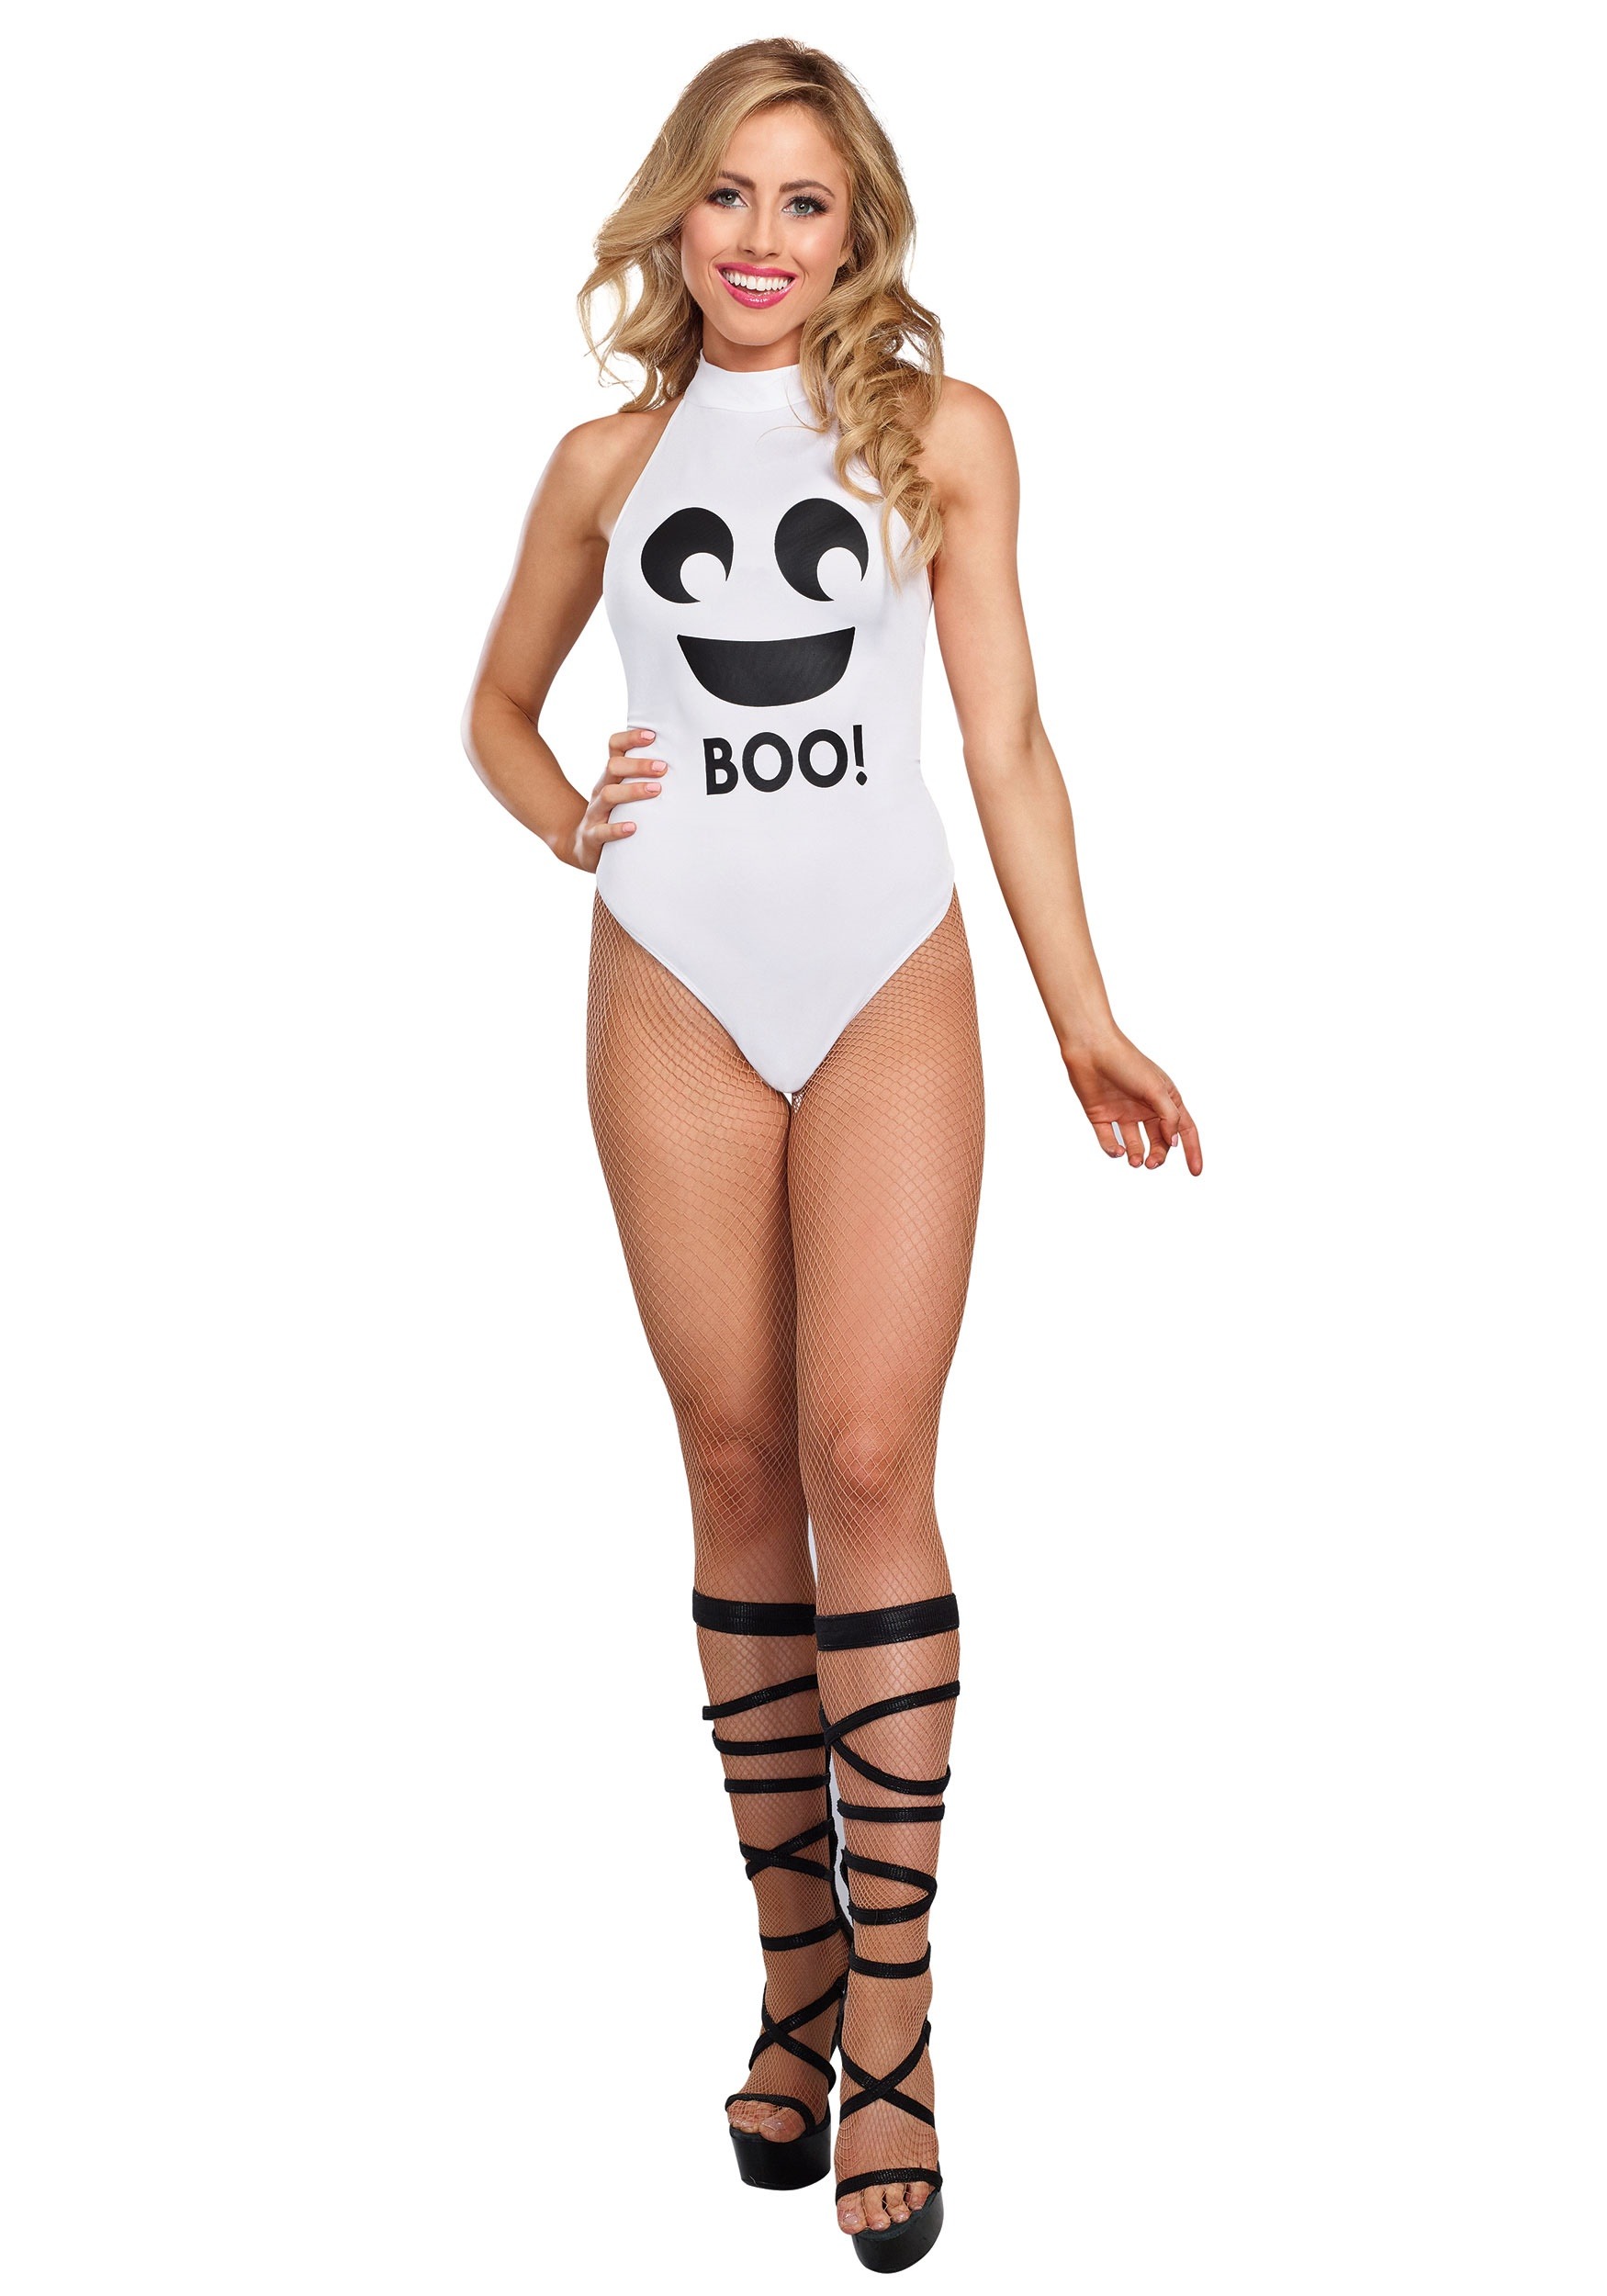 https://images.halloweencostumes.com/products/46771/1-1/ghost-bodysuit.jpg